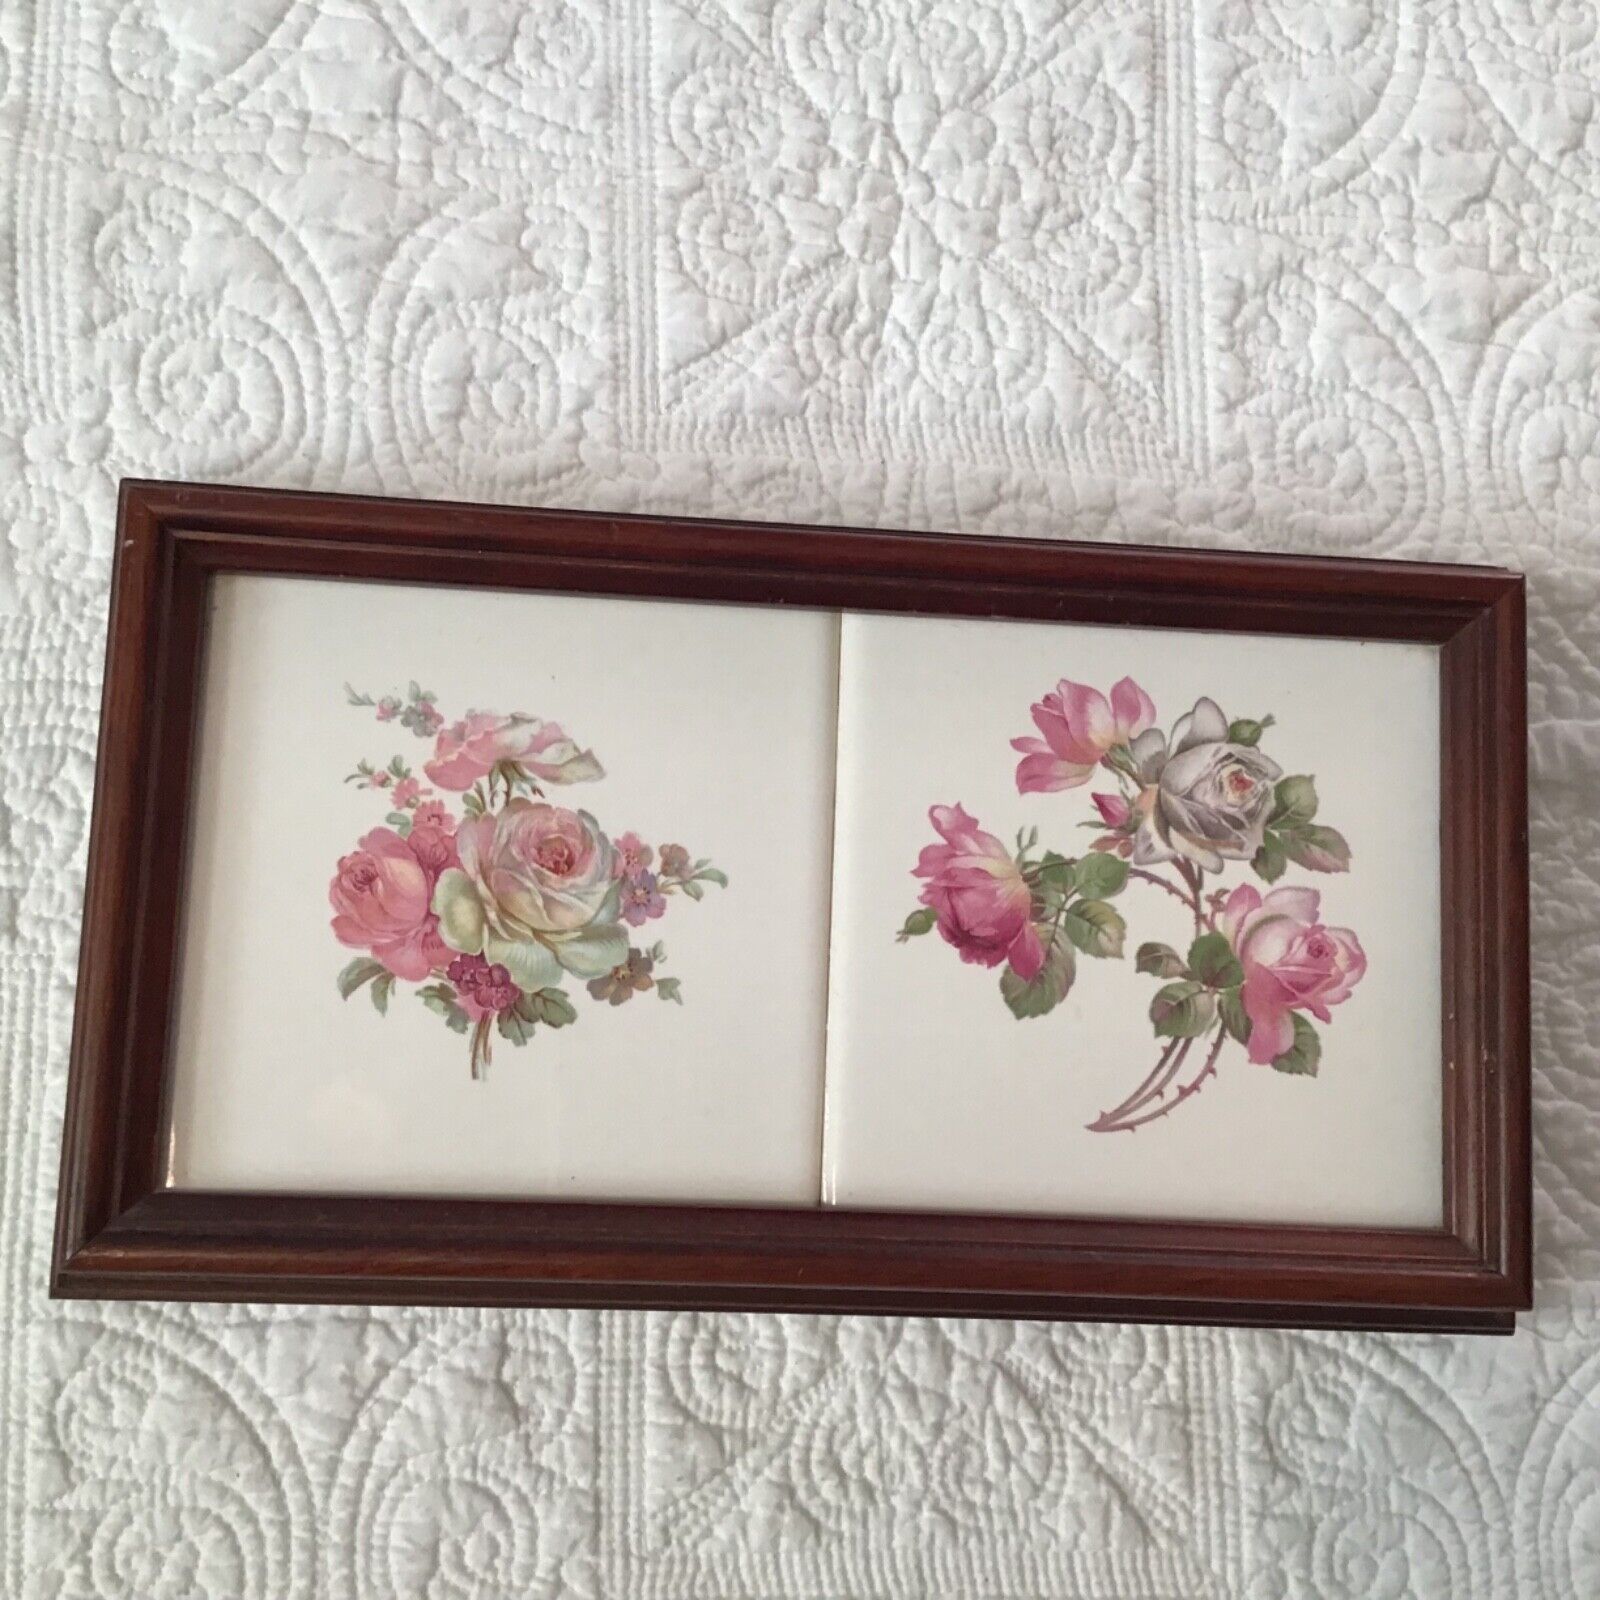 Vintage Wooden Framed Wall Hanging 2 White Tiles With Pink Roses